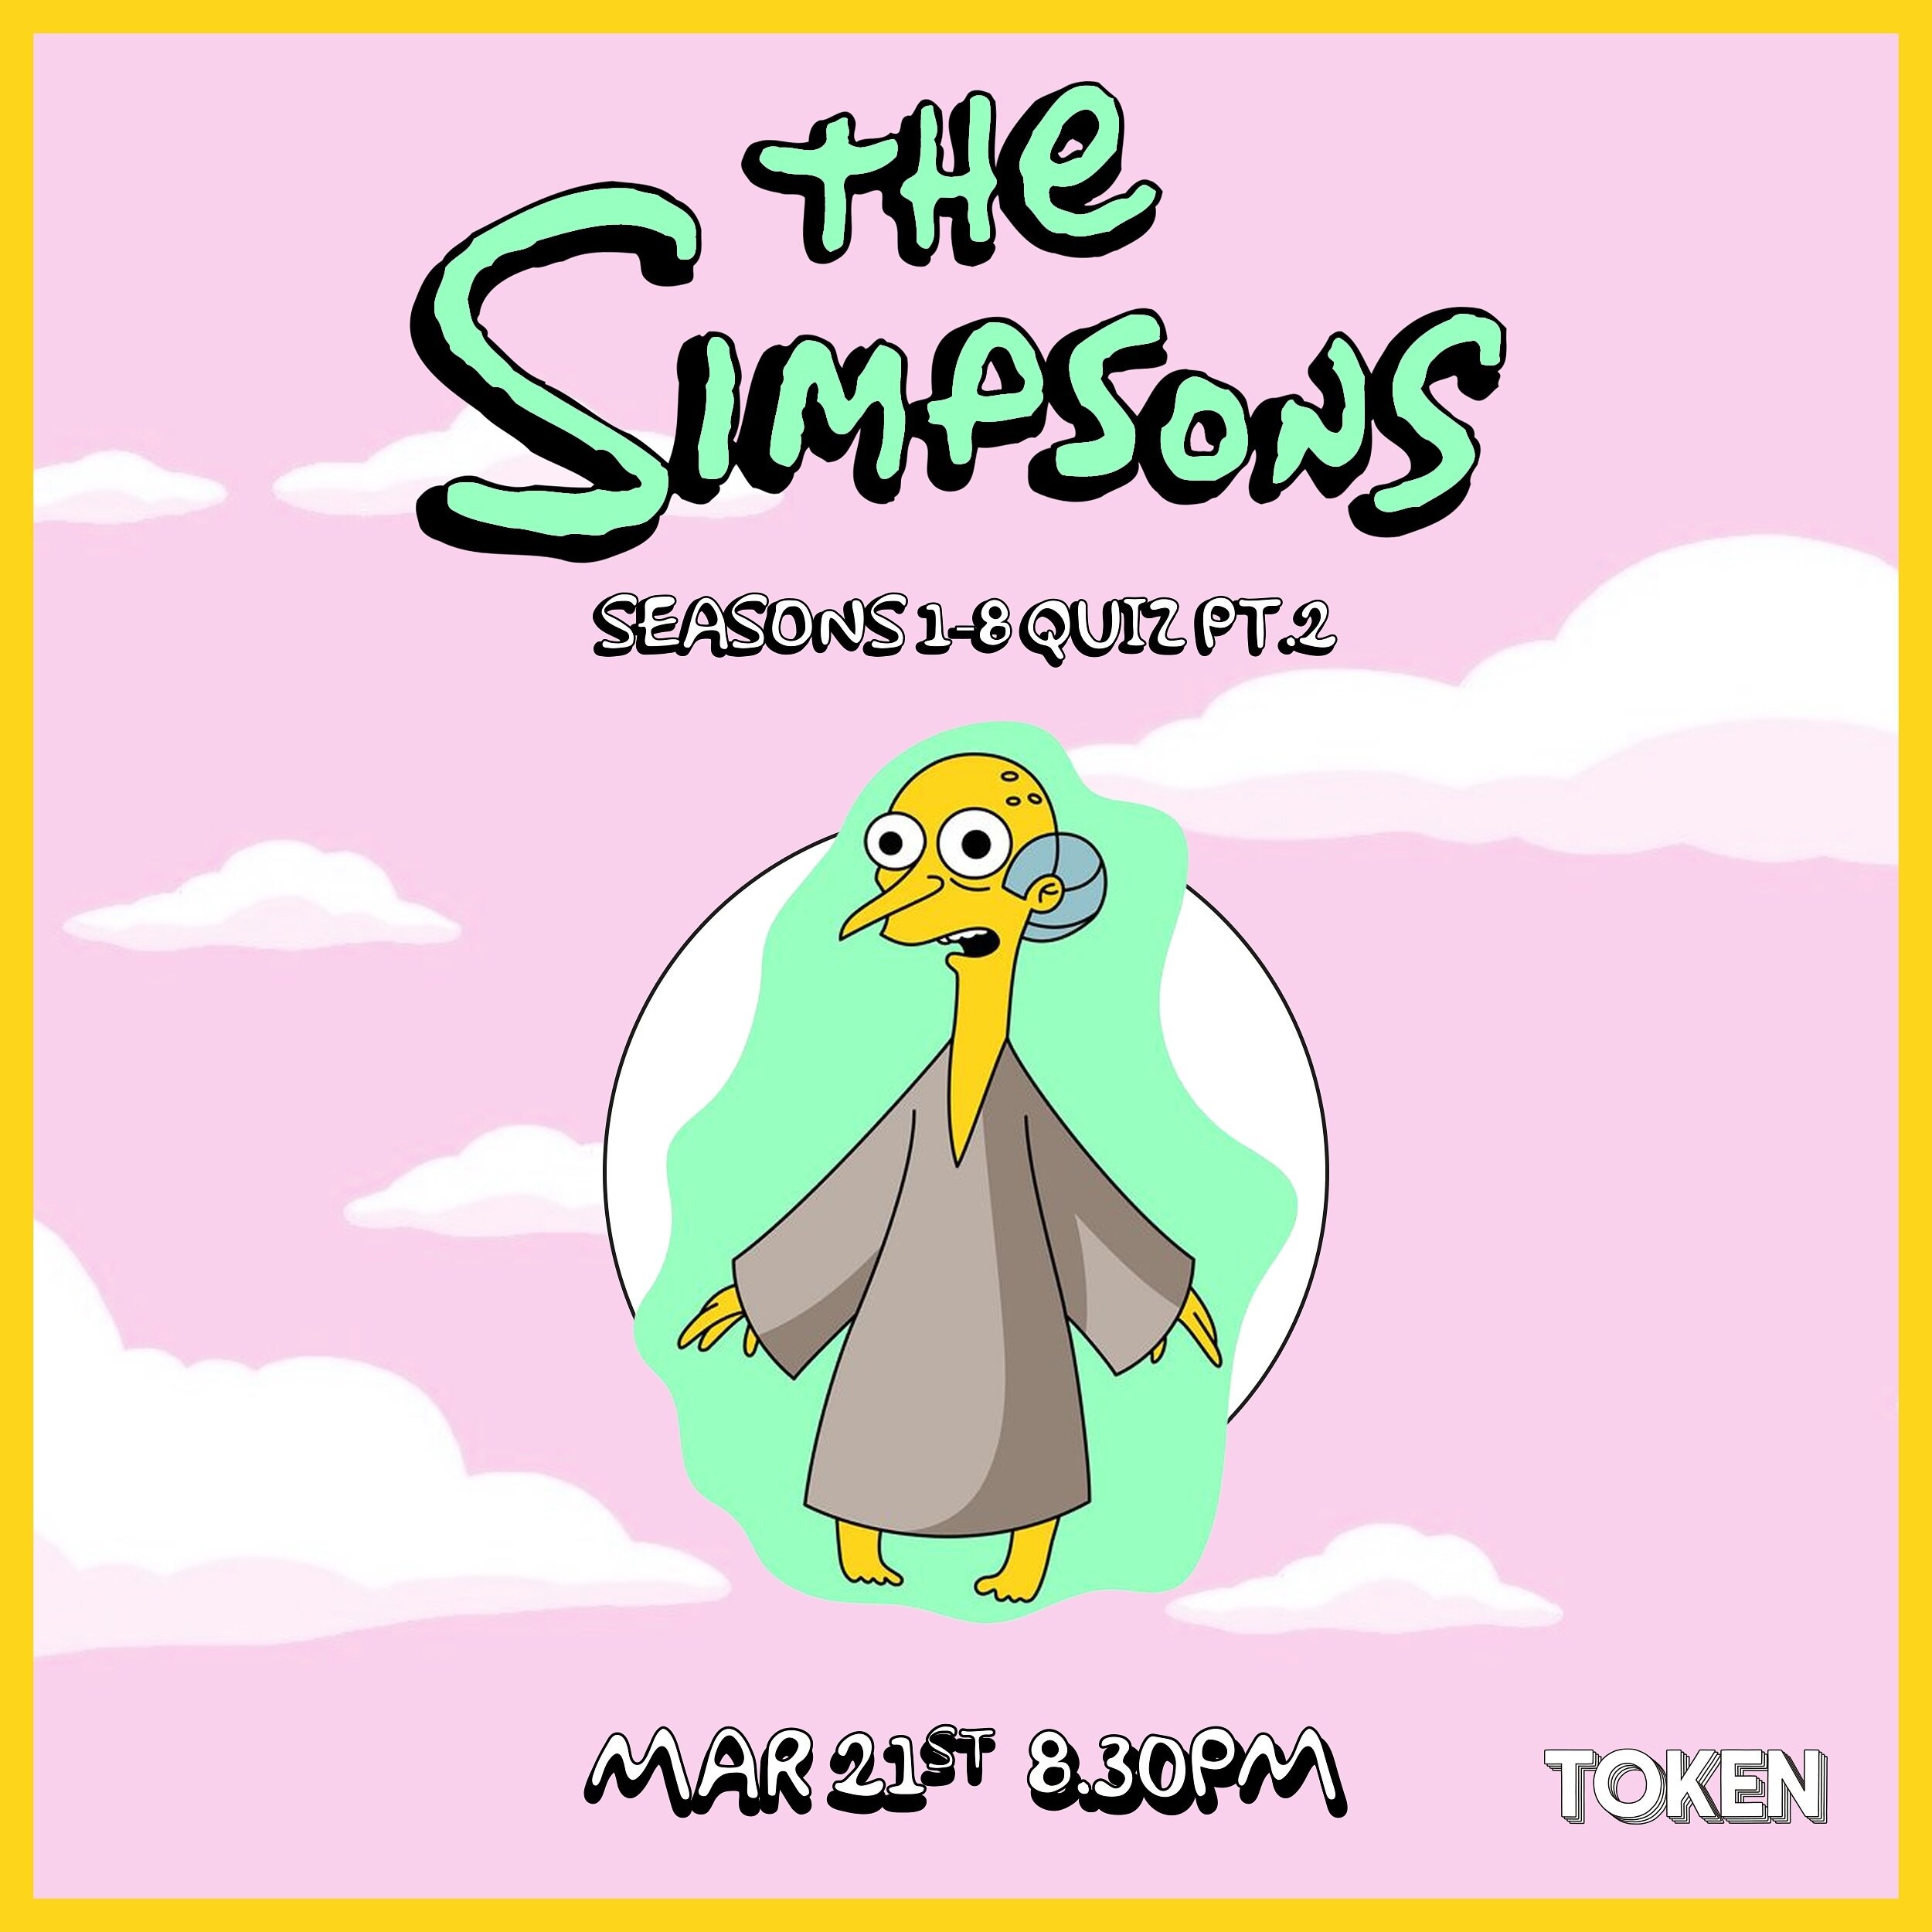 DUE TO POPULAR DEMAND. 

Tickets are now on sale for our SECOND Simpsons Season 1-8 Quiz Night on March 21st, 8.30pm! Available through the link in our bio, or on our website.

Costs &euro;30 per table (table holds up to 5 people), winner takes home 